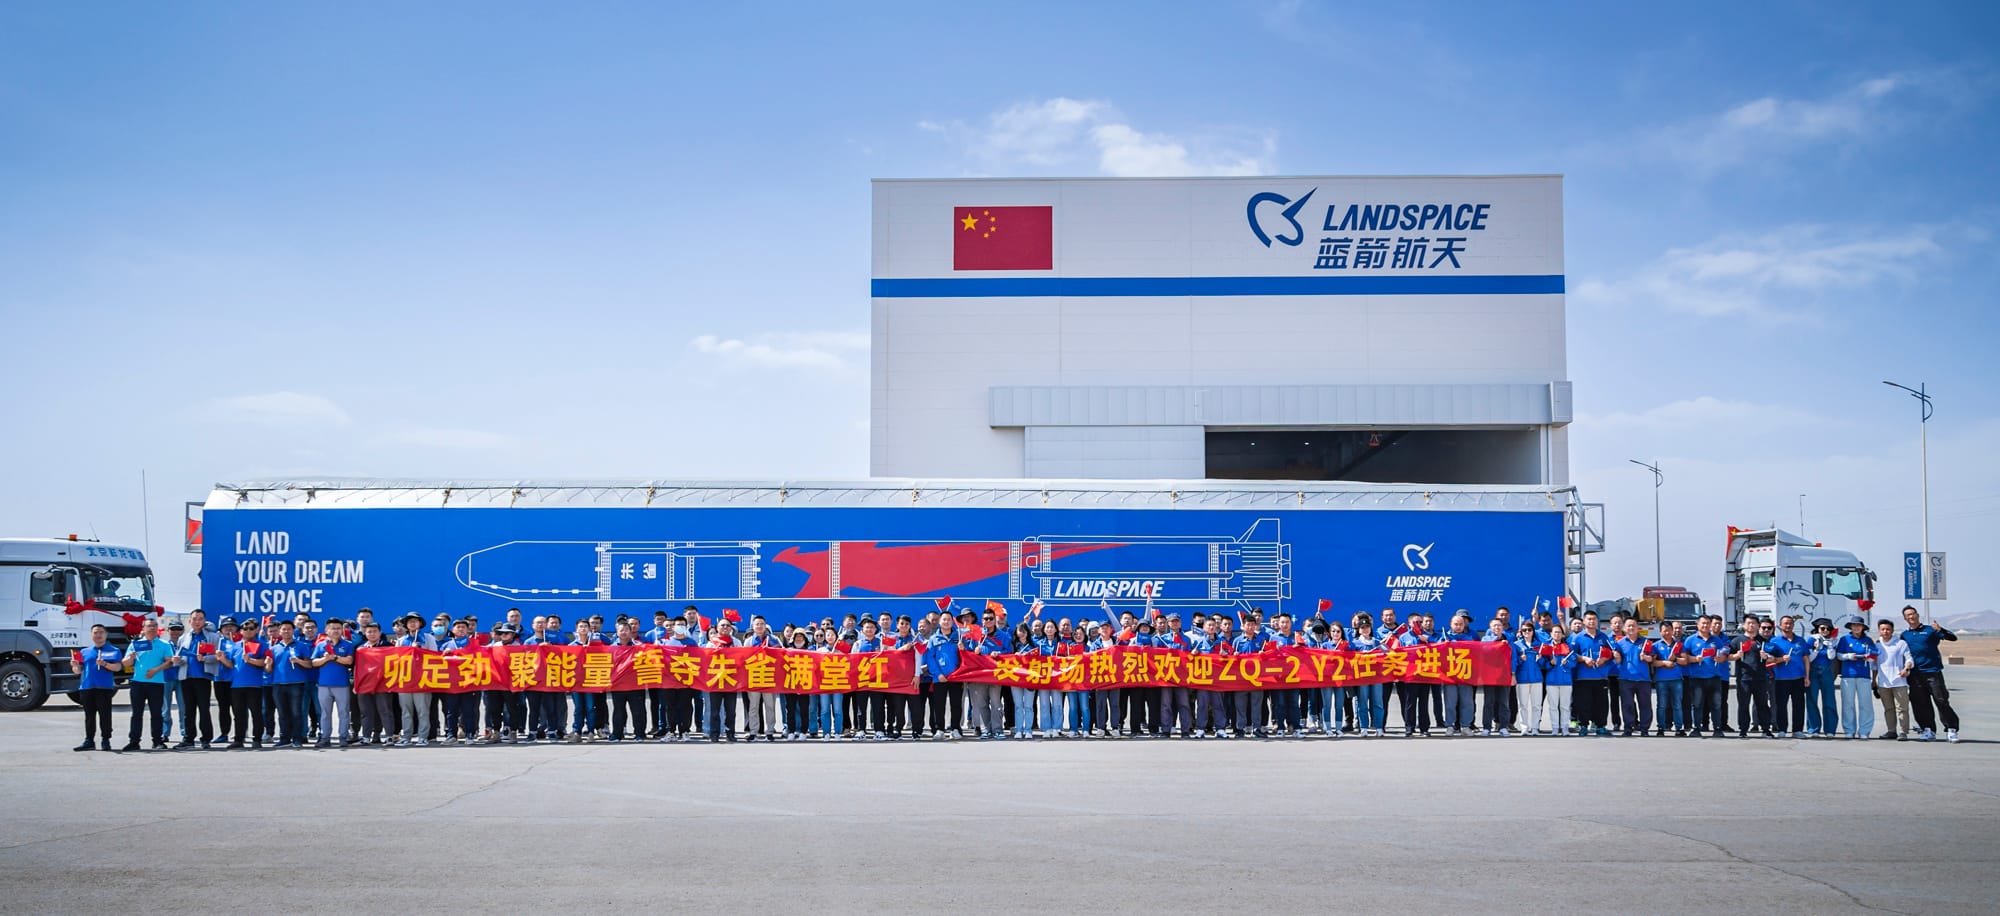 LandSpace's facility at the Jiuquan Satellite Launch Center after the arrival of the second Zhuque-2 rocket. ©LandSpace